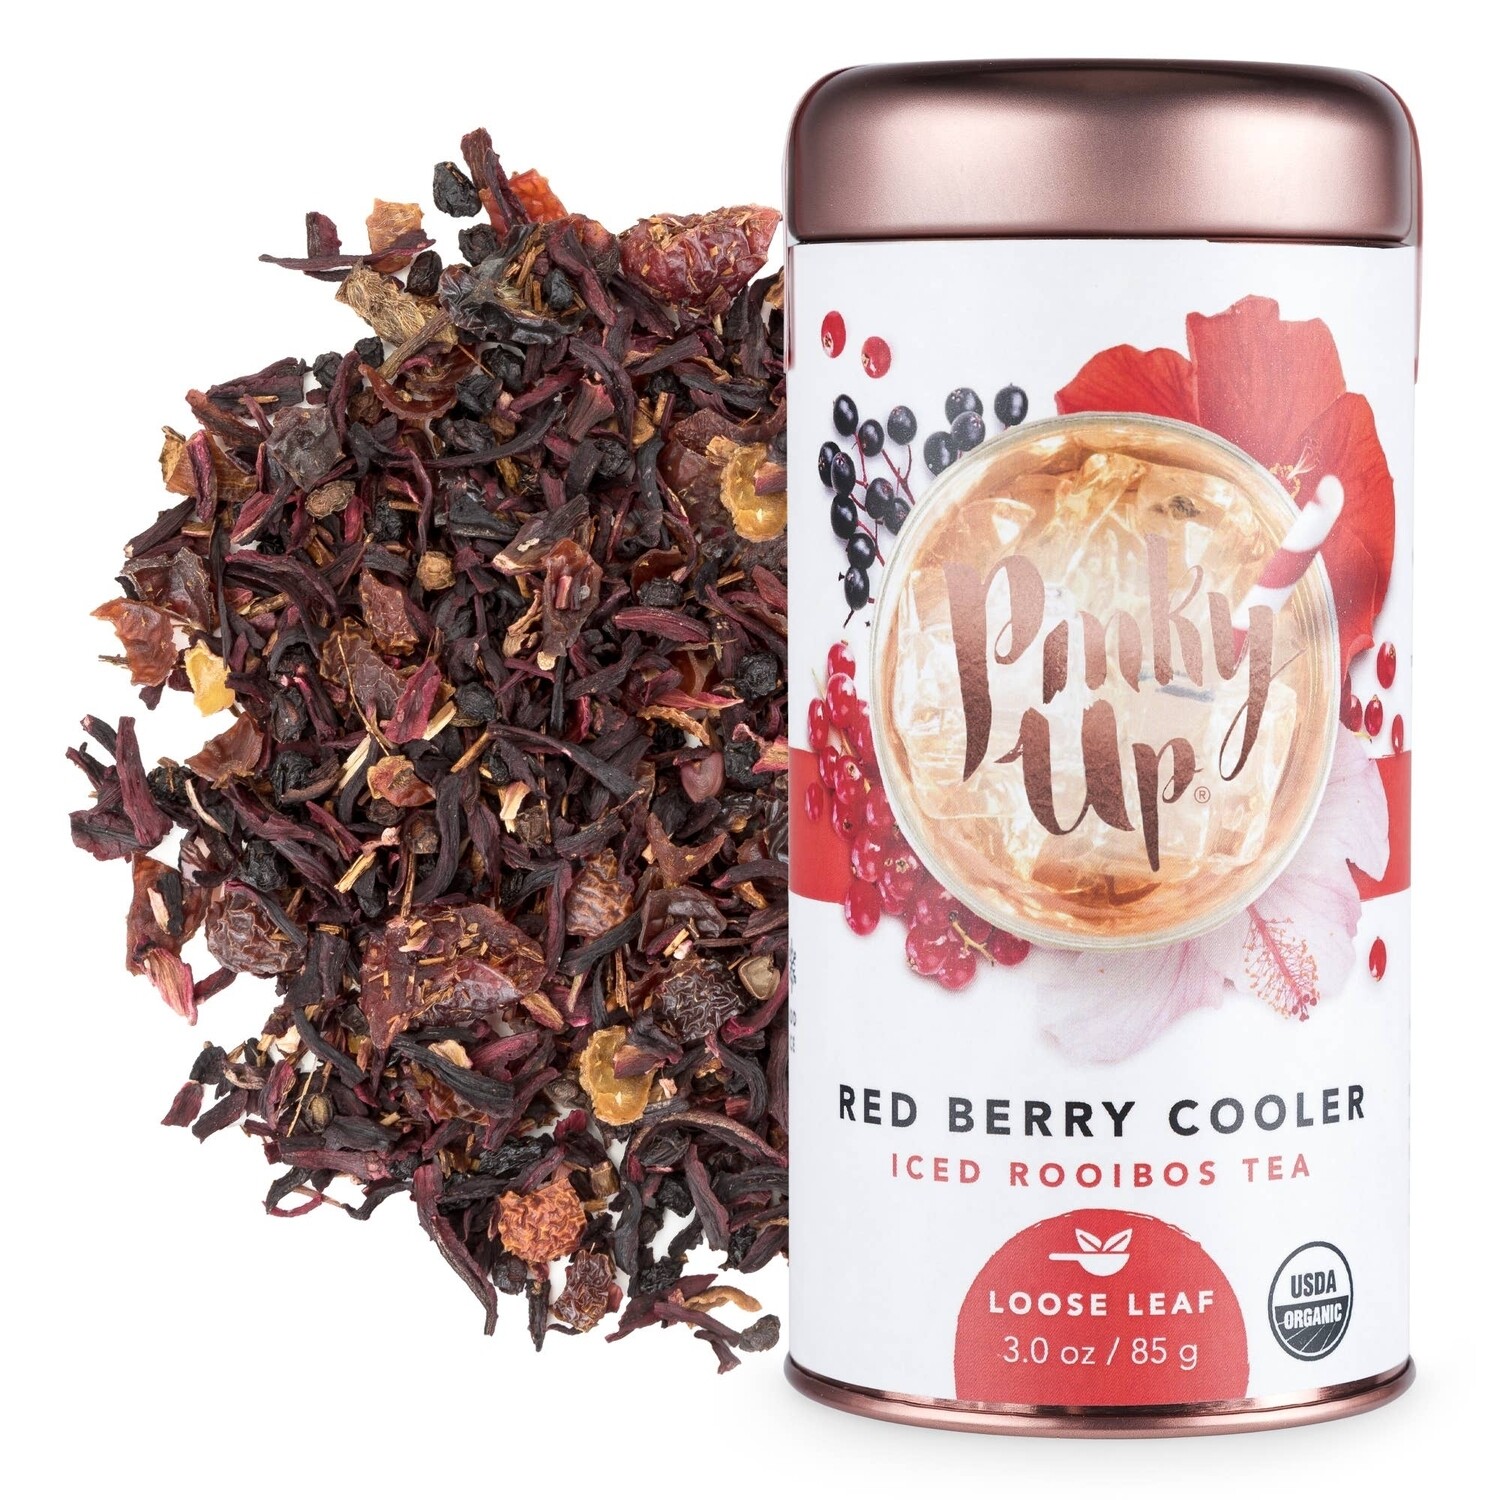 Pinky Up Red Berry Cooler Iced Tea Loose